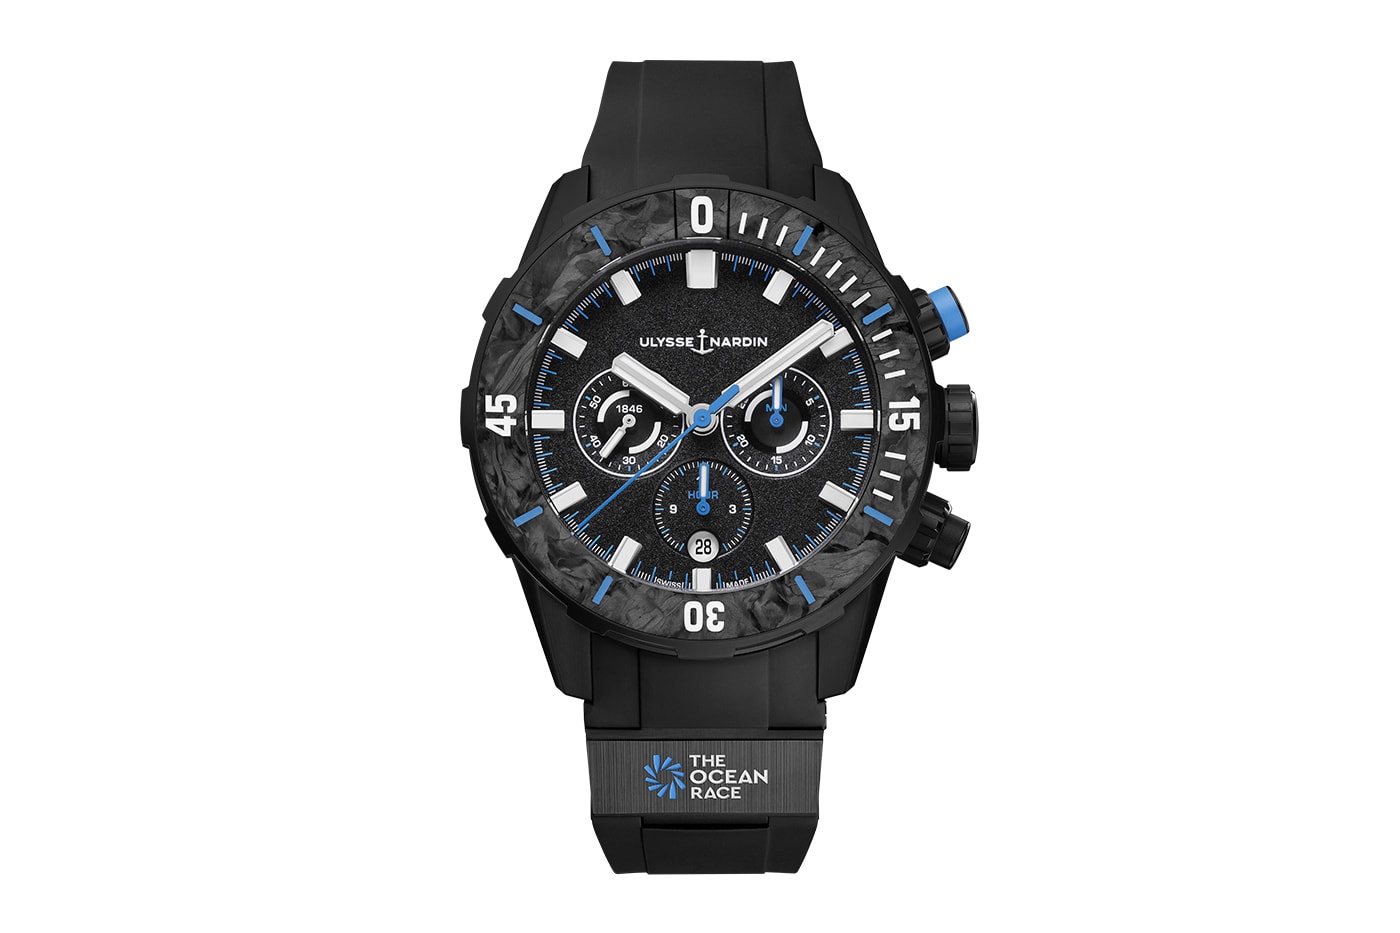 Ulysse Nardin Ocean Race Diver Chronograph Limited-Edition Release Info